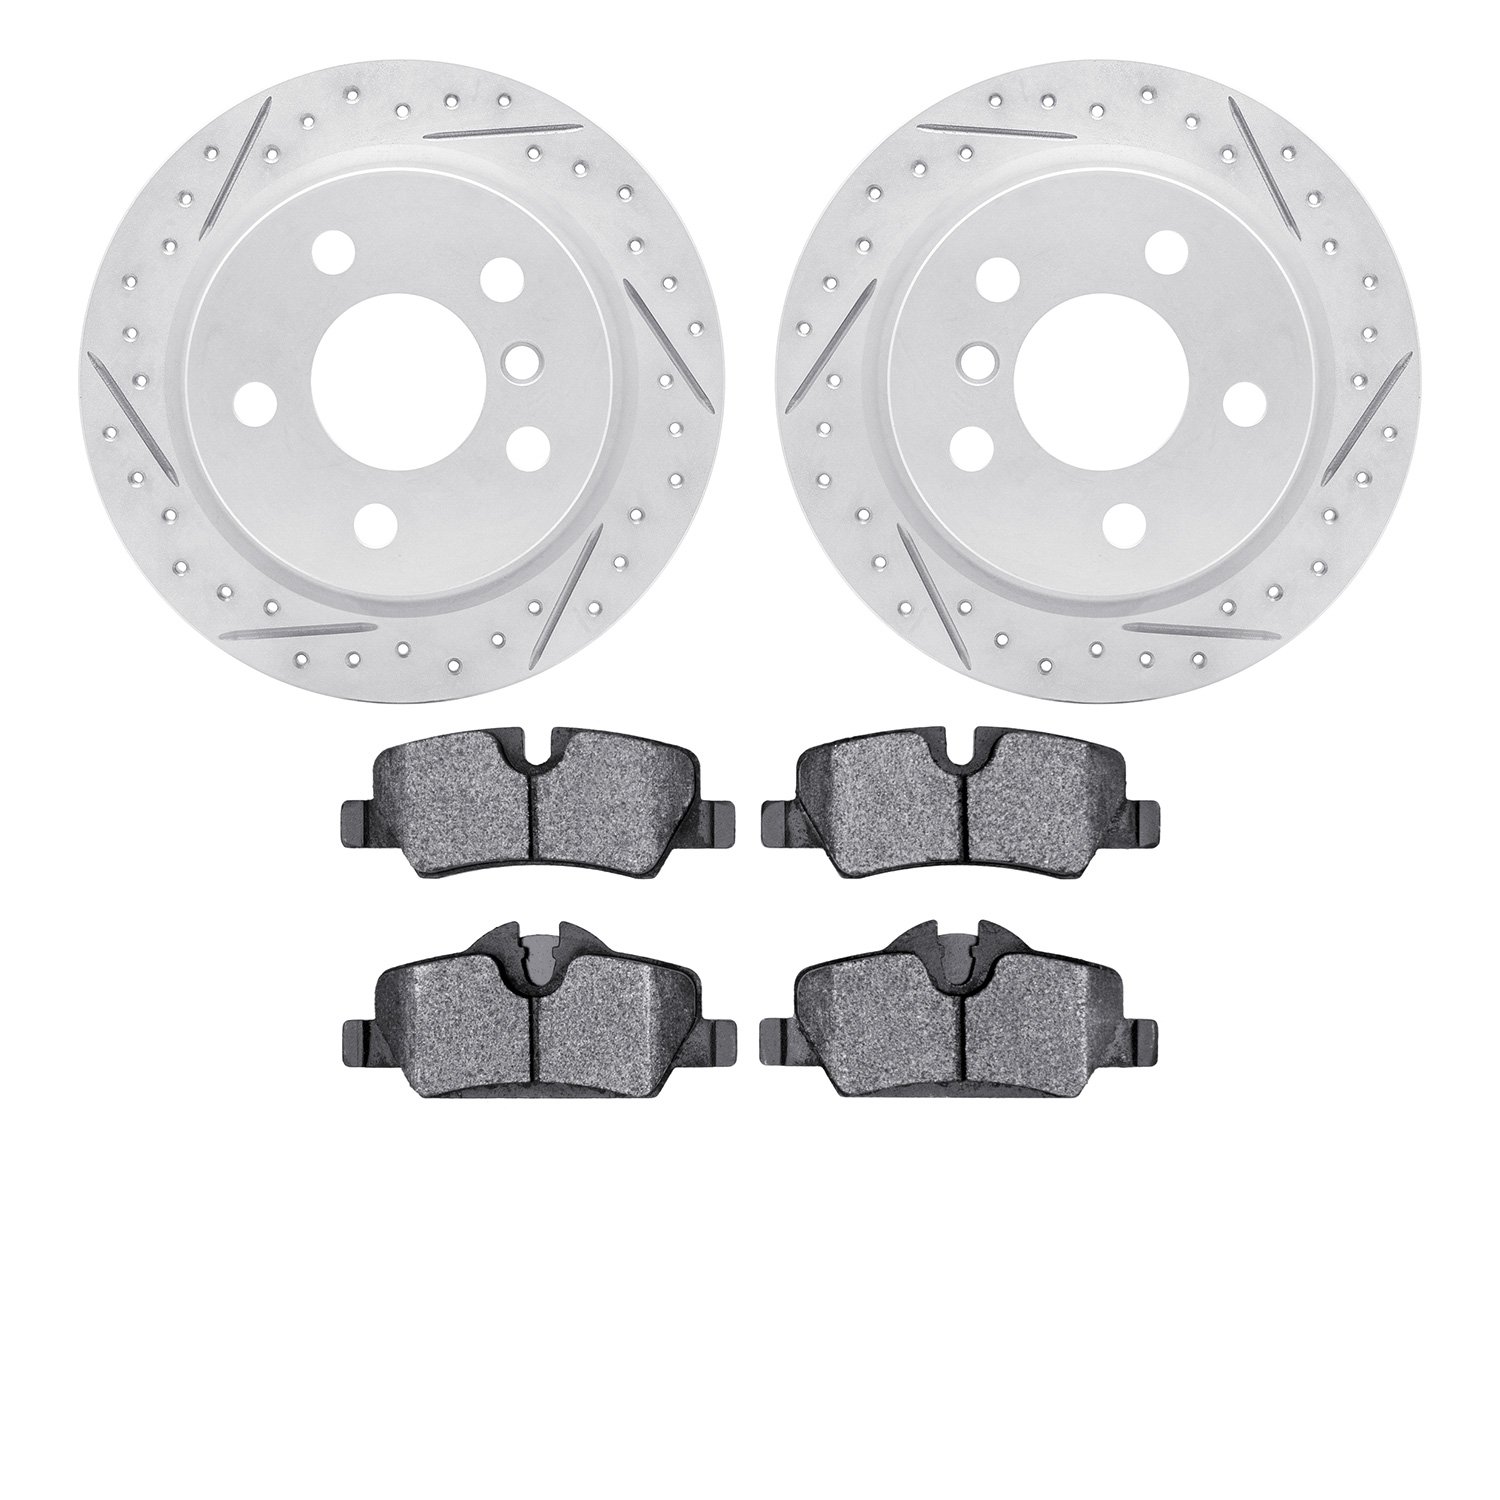 2502-32020 Geoperformance Drilled/Slotted Rotors w/5000 Advanced Brake Pads Kit, Fits Select Mini, Position: Rear